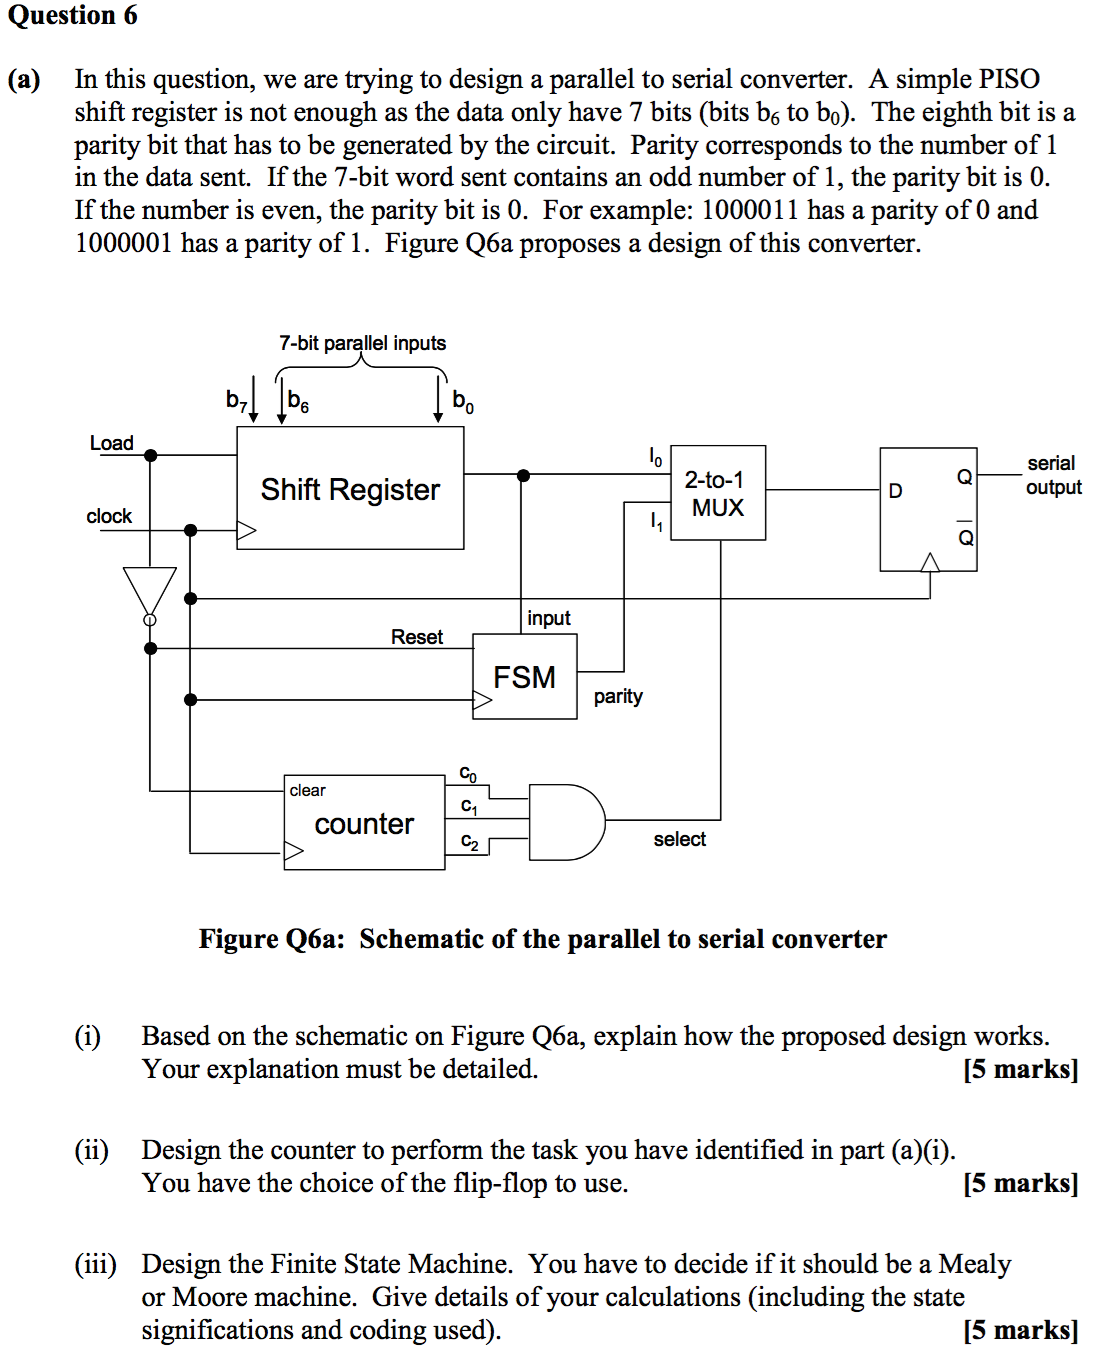 design a parallel to serial converter